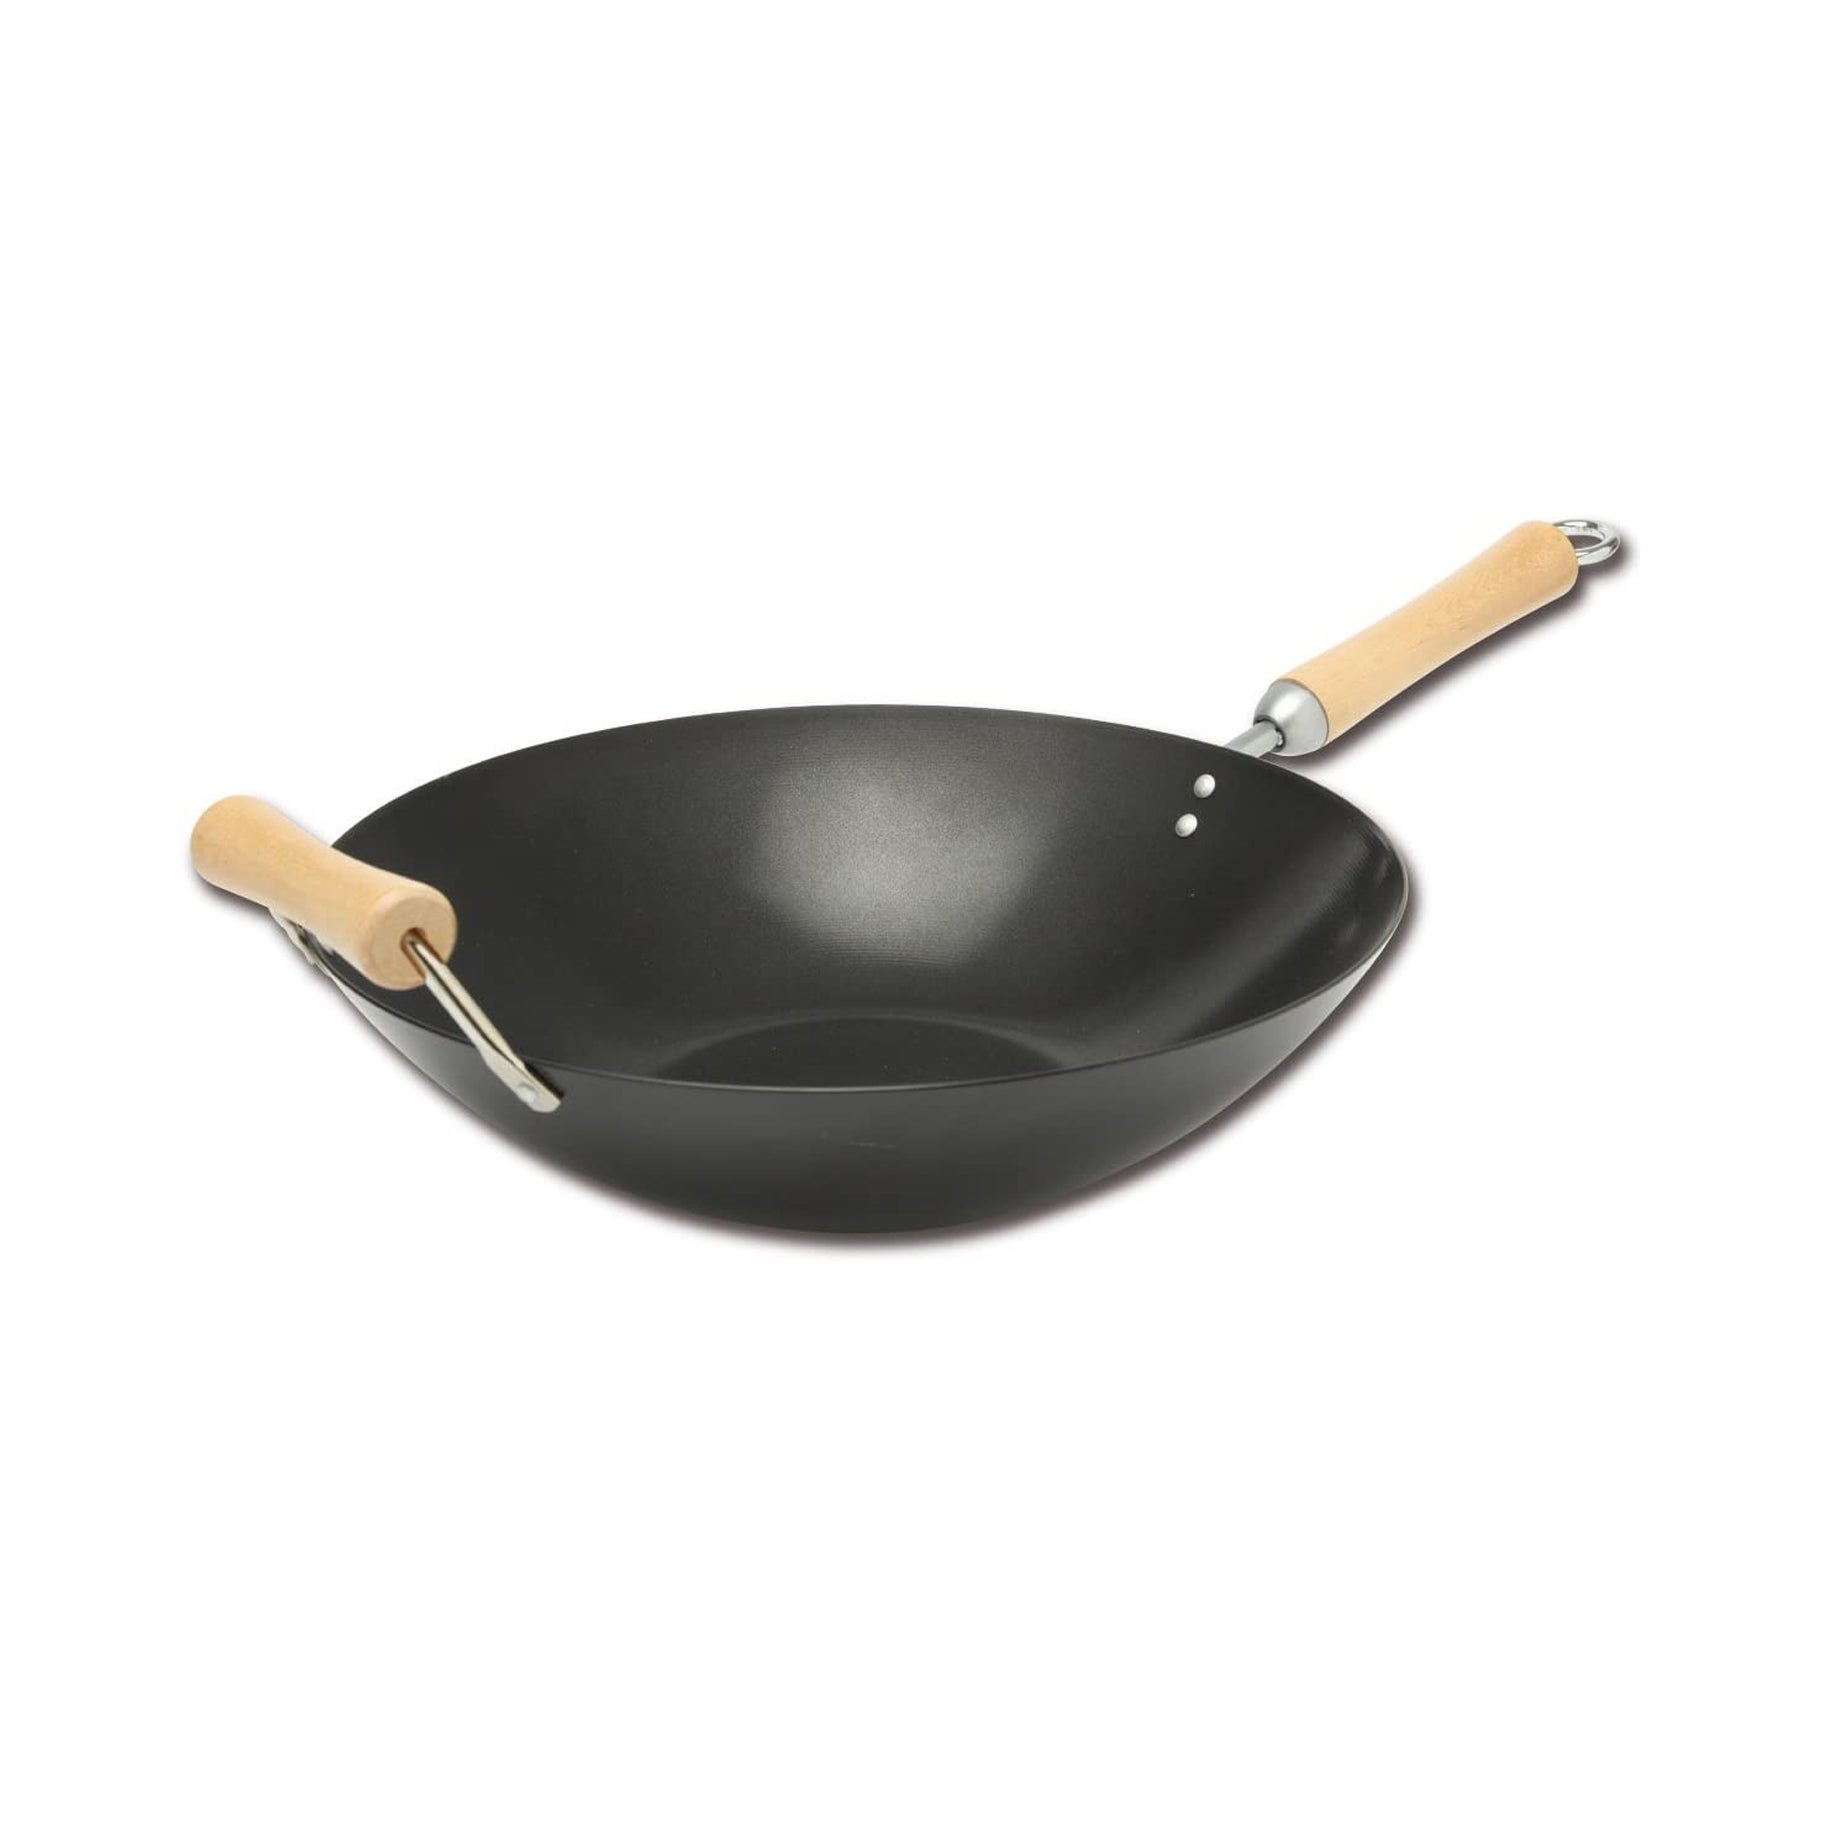 How to Choose the Best Wok for Your Kitchen – Lid & Ladle